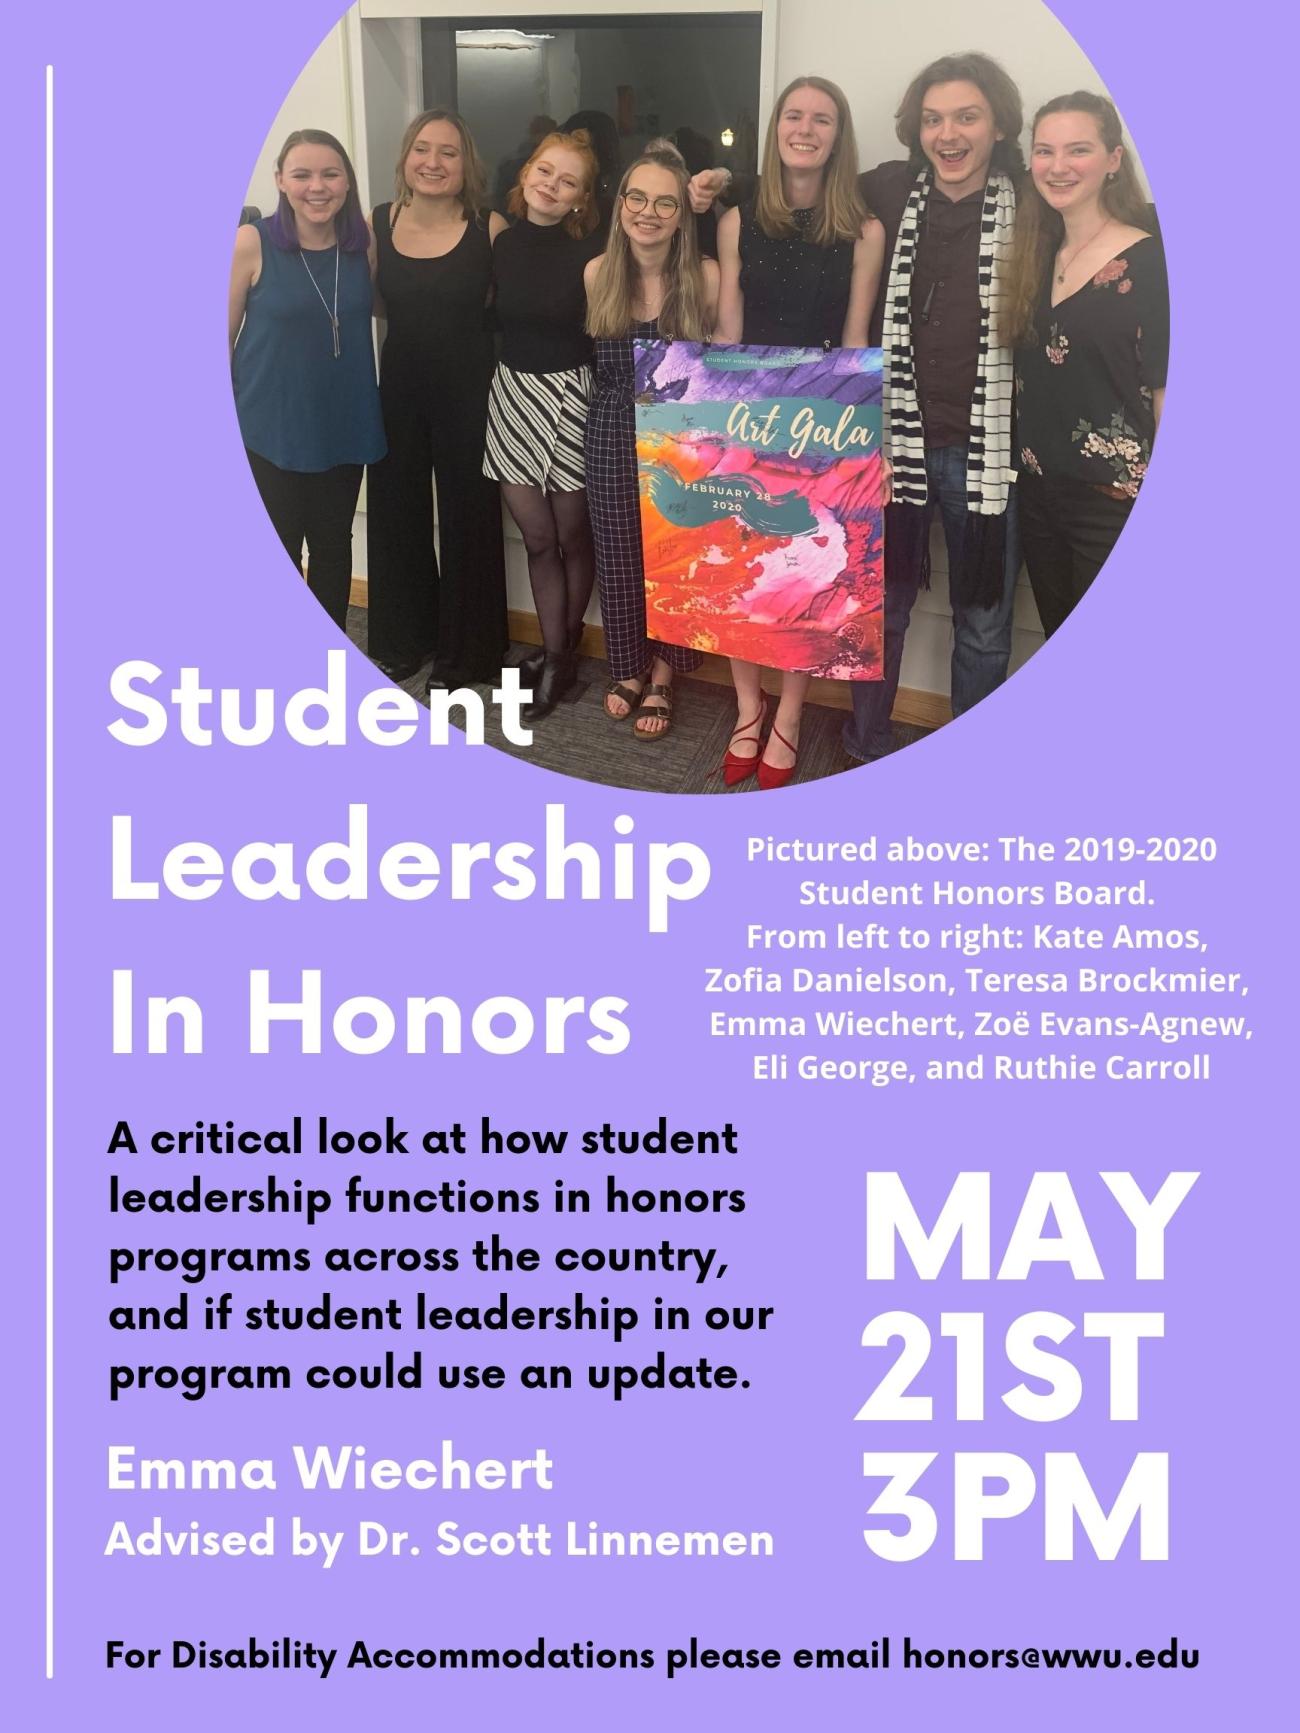 Purple poster with a circular photo of the 2019-2020 Student Honors Board: Kate Amos, Zofia Danielson, Teresa Brockmier, Emma Wiechert, Zoë Evans-Agnew, Eli George, and Ruthie Carroll. Text reads: "Student Leadership In Honors: a critical look at how student leadership functions in honors programs across the country and if student leadership in our program could use an update. May 21st 3pm. Emma Wiechert, Advised by Dr. Scott Linneman. For disability accommodations please email honors@wwu.edu".